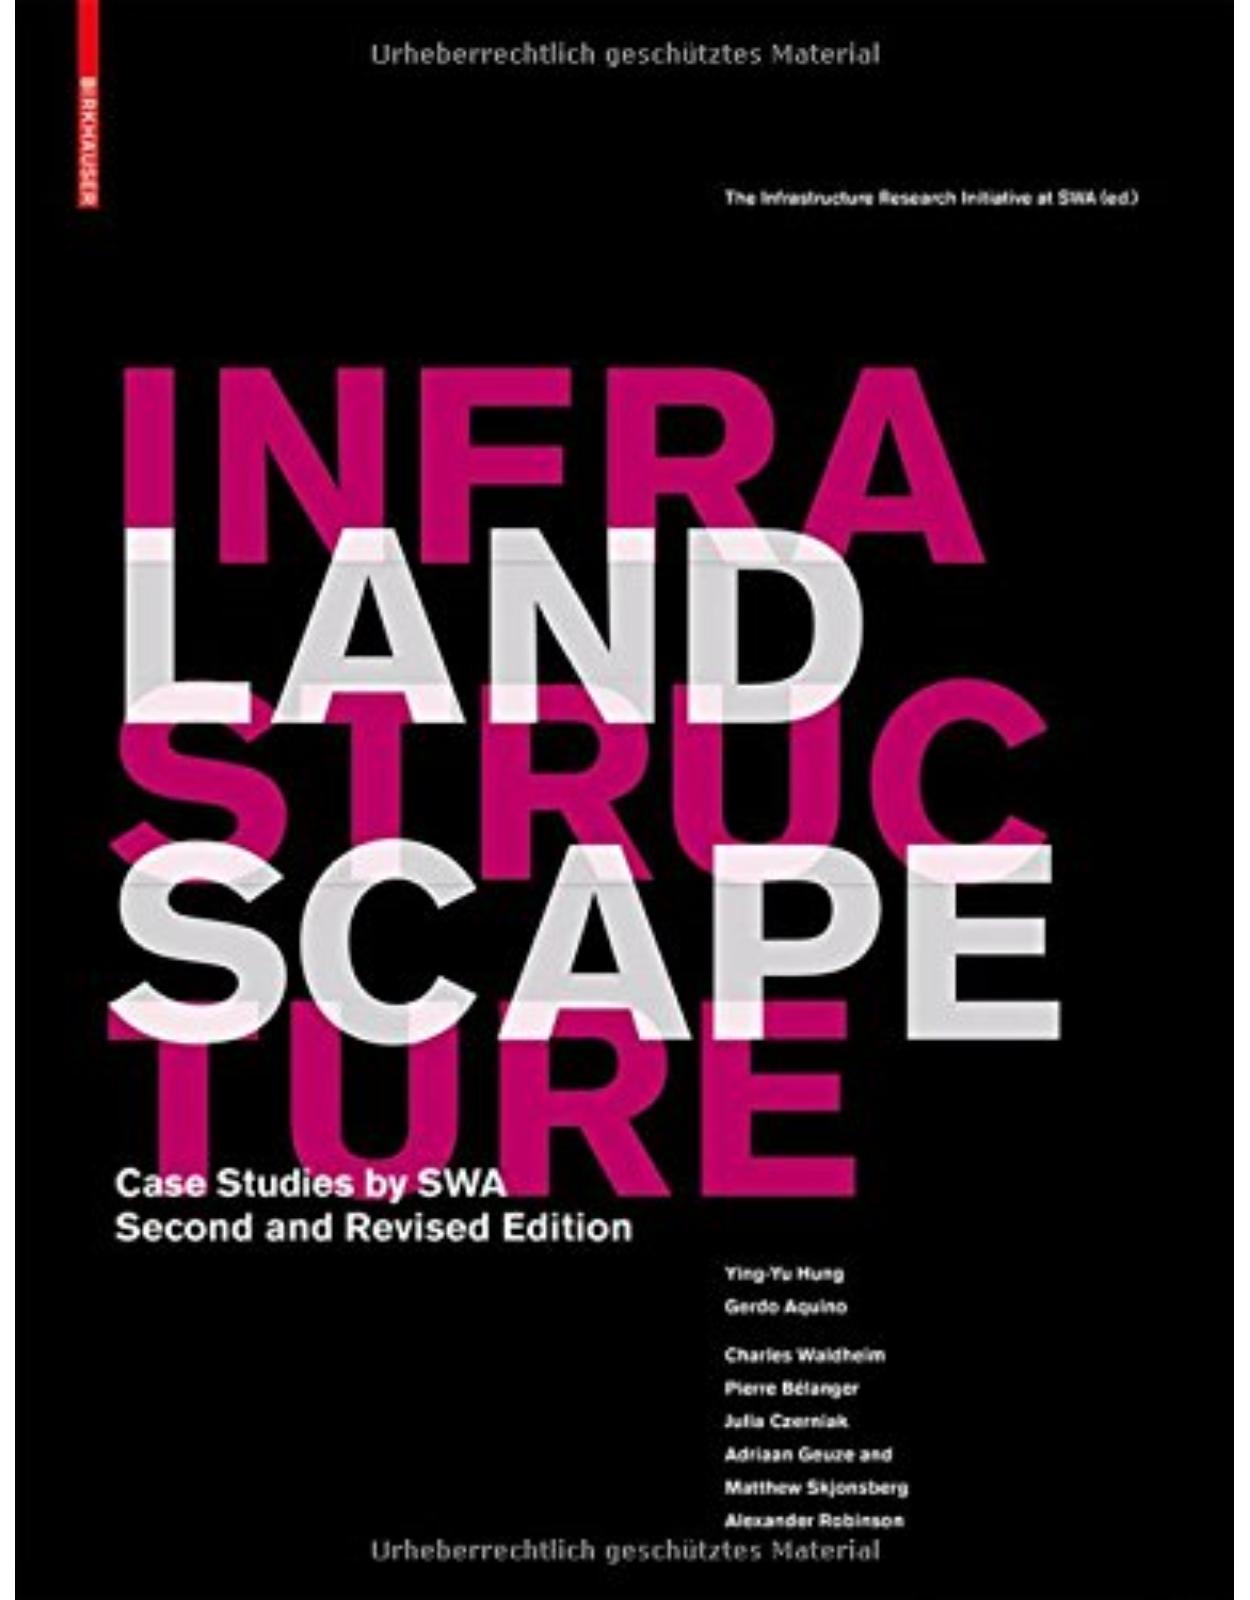 Landscape Infrastructure: Case Studies by SWA: Case Studies by SWA - second and revised edition